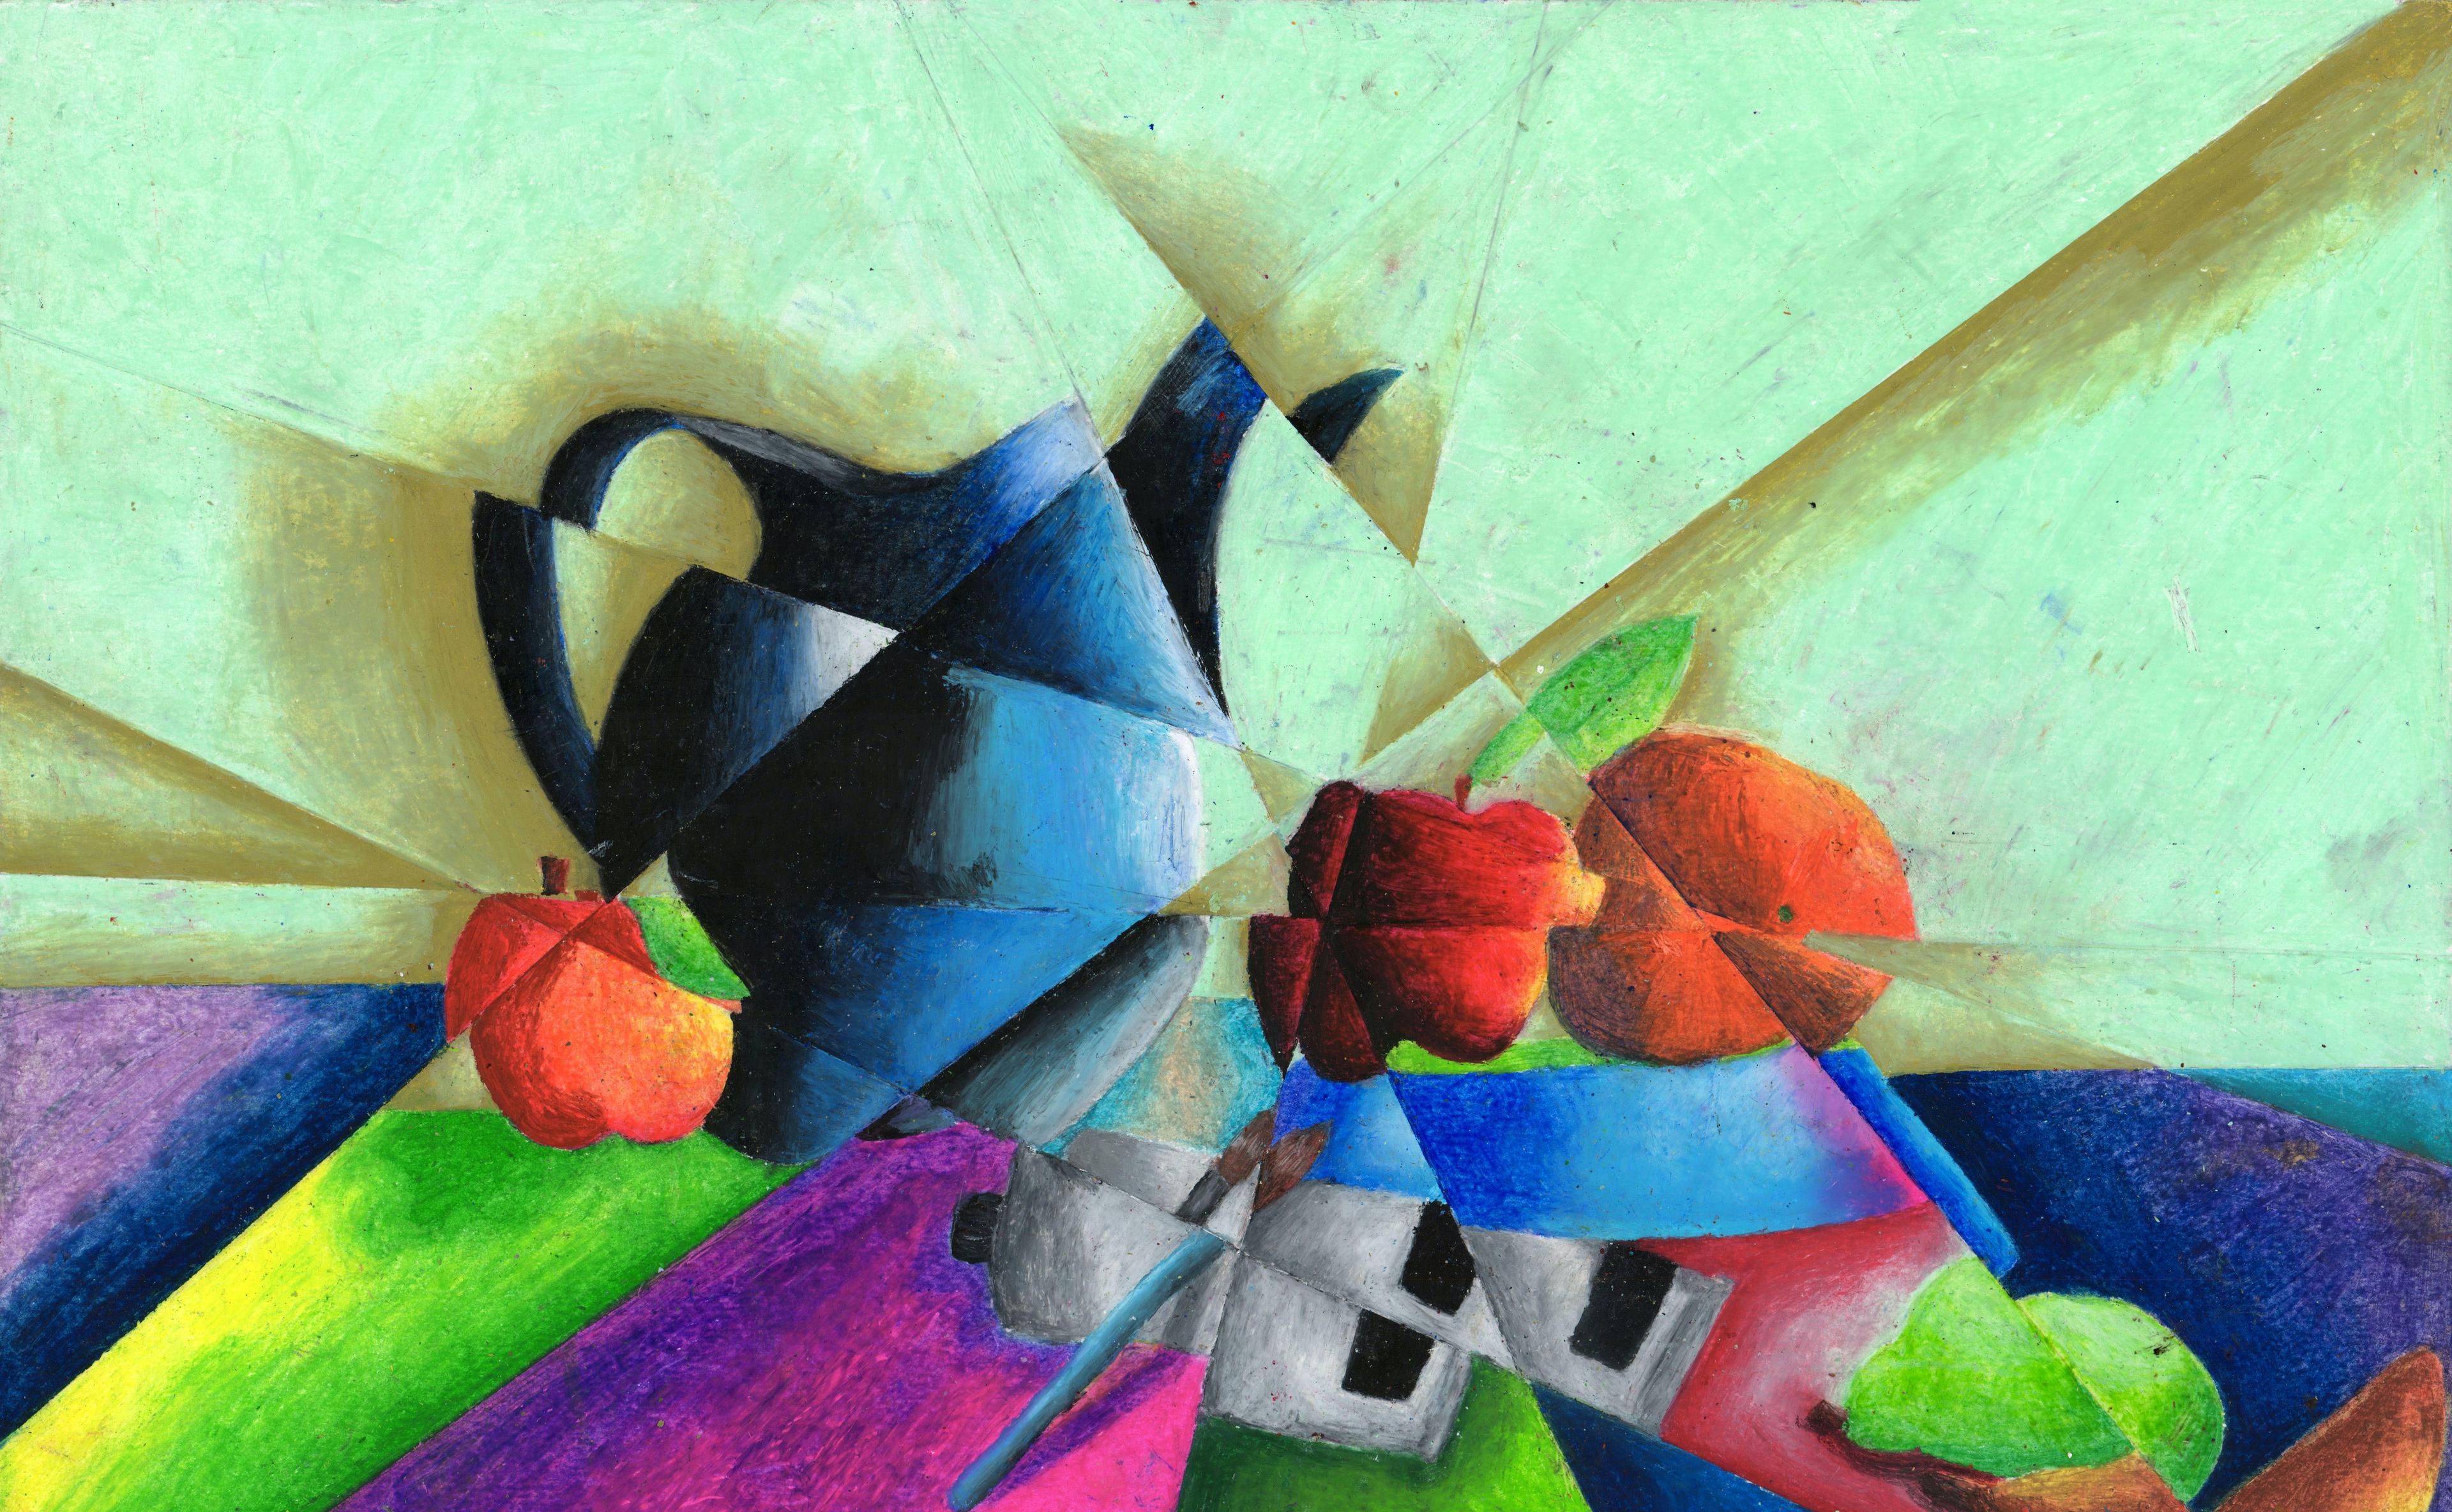 Cubist oil pastel illustration of a still-life scene of red fruits and a blue kettle that appears to be shown at jagged angles through prisms of shattered glass or a broken mirror. The still-life elements rest upon a pale green backdrop. Bold green, magenta, and red panels of jagged color cut through the scene from the top of the image at intersecting diagonal angles.